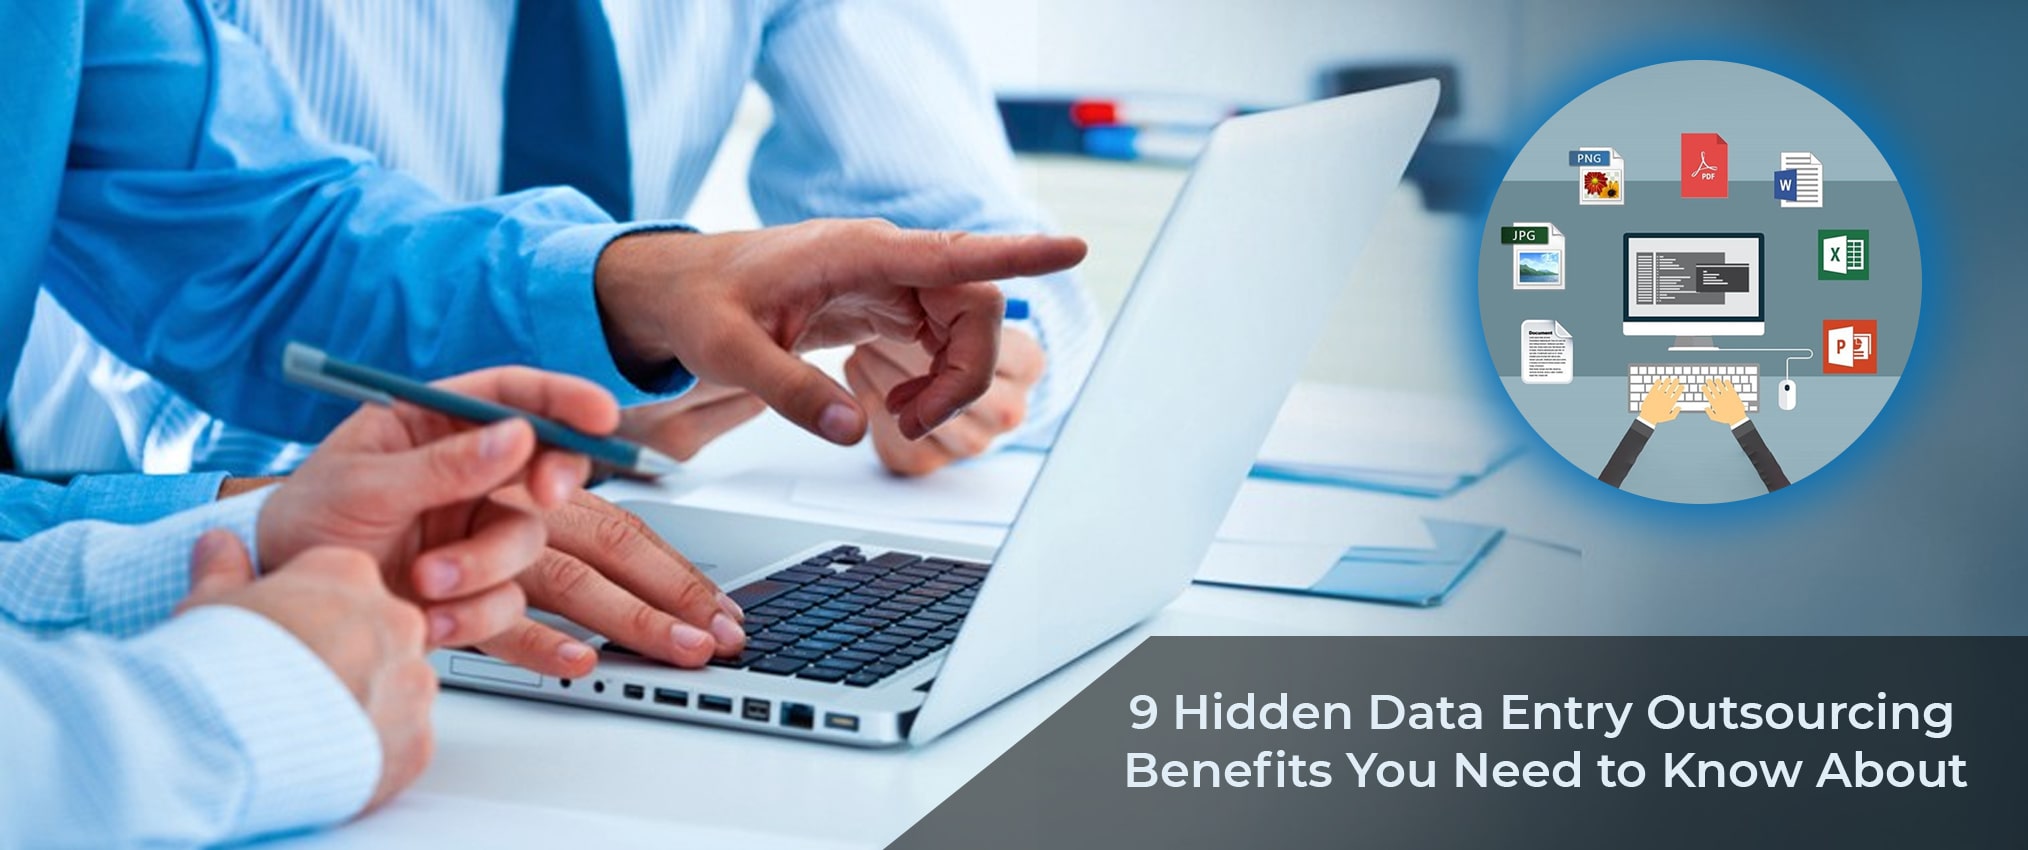 9-Hidden-Data-Entry-Outsourcing-Benefits-You-Need-to-Know-About